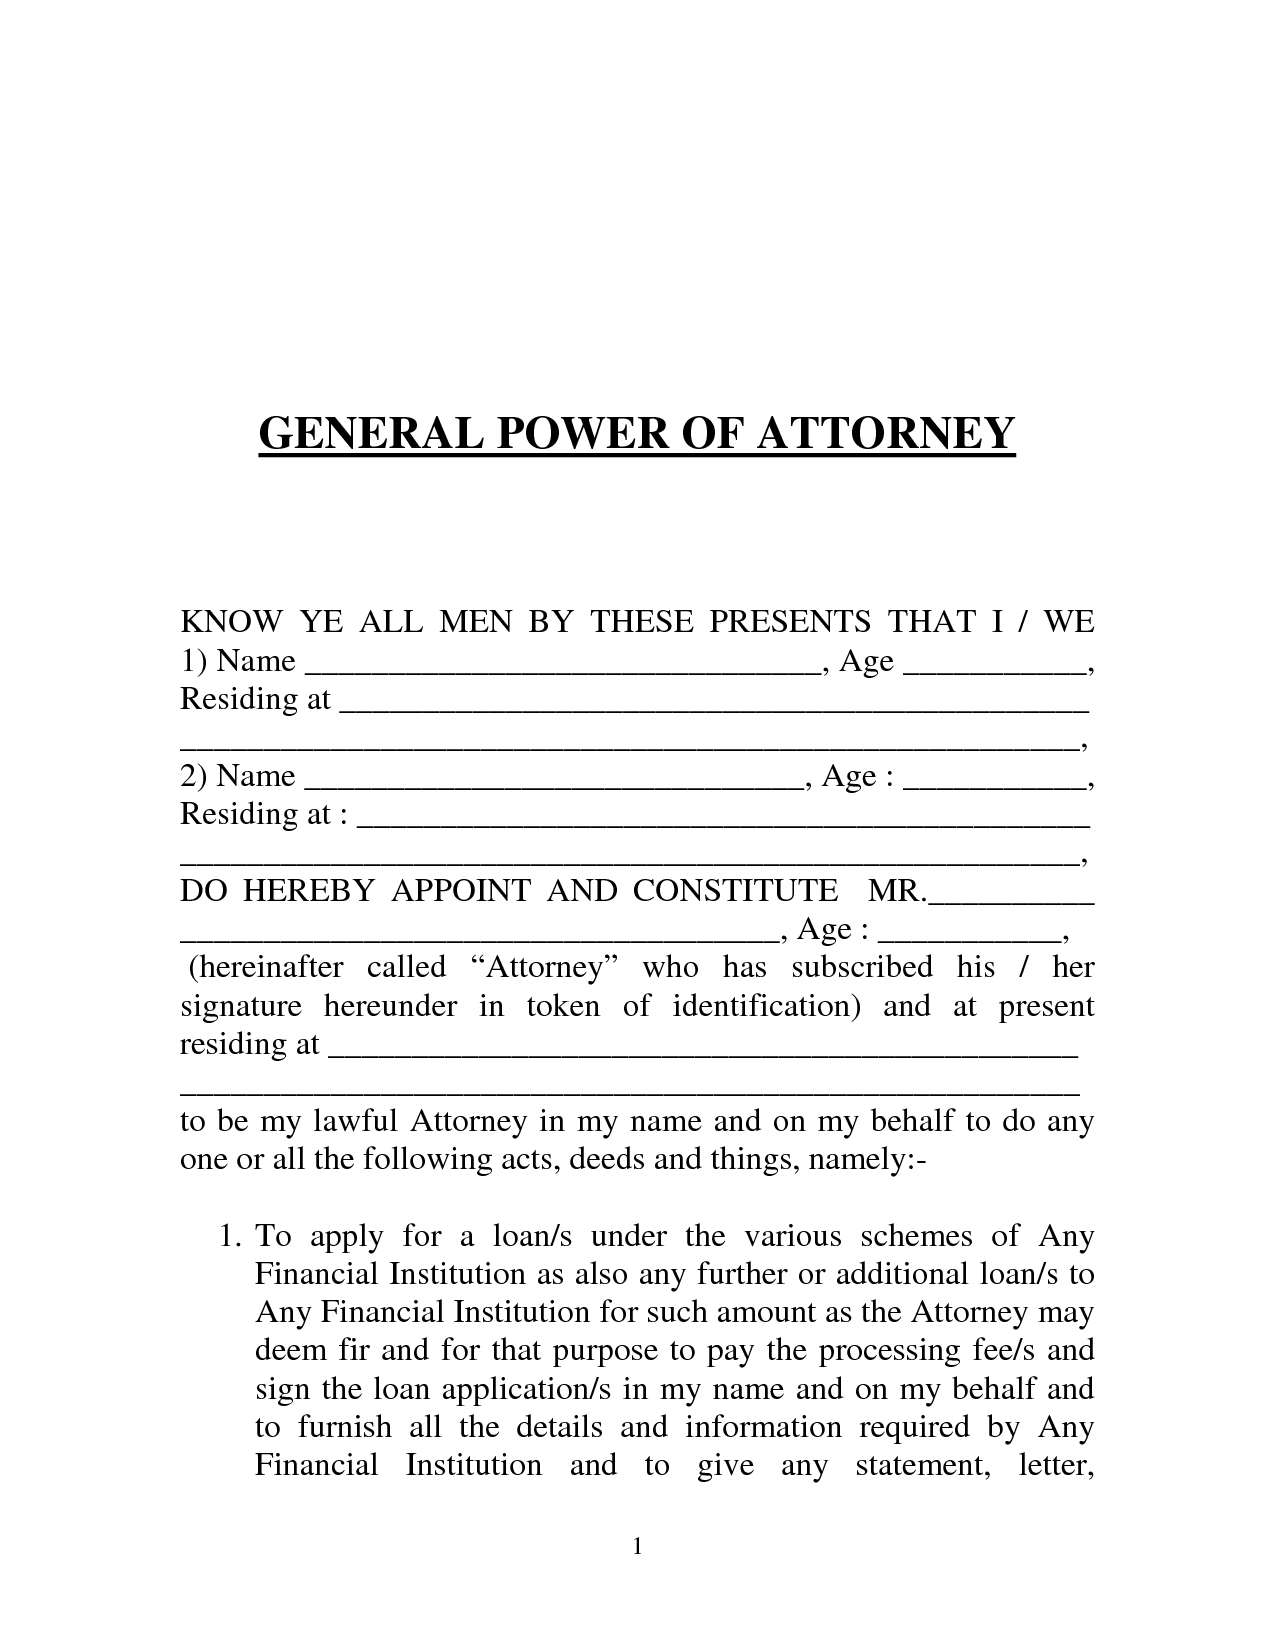 Free Printable Power Of Attorney Form (Generic) - Free Printable Power Of Attorney Forms Online